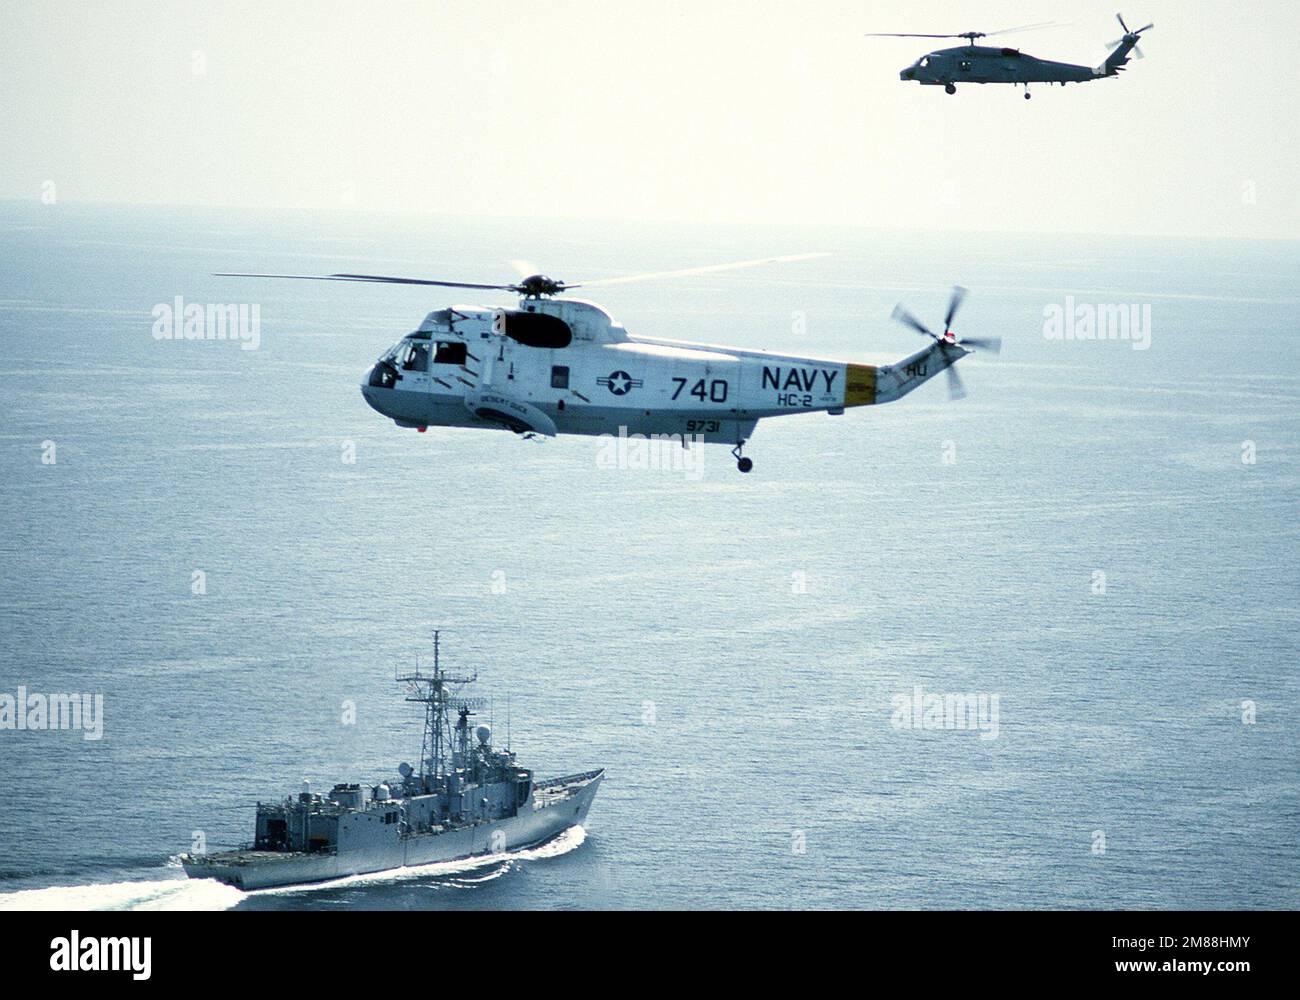 An air-to-air left view of a Helicopter Combat Support Squadron 2 (HC-2) SH-3 Sea King helicopter and an SH-60B Sea Hawk helicopter over the guided missile frigate USS RENTZ (FFG-46). Country: Unknown Stock Photo